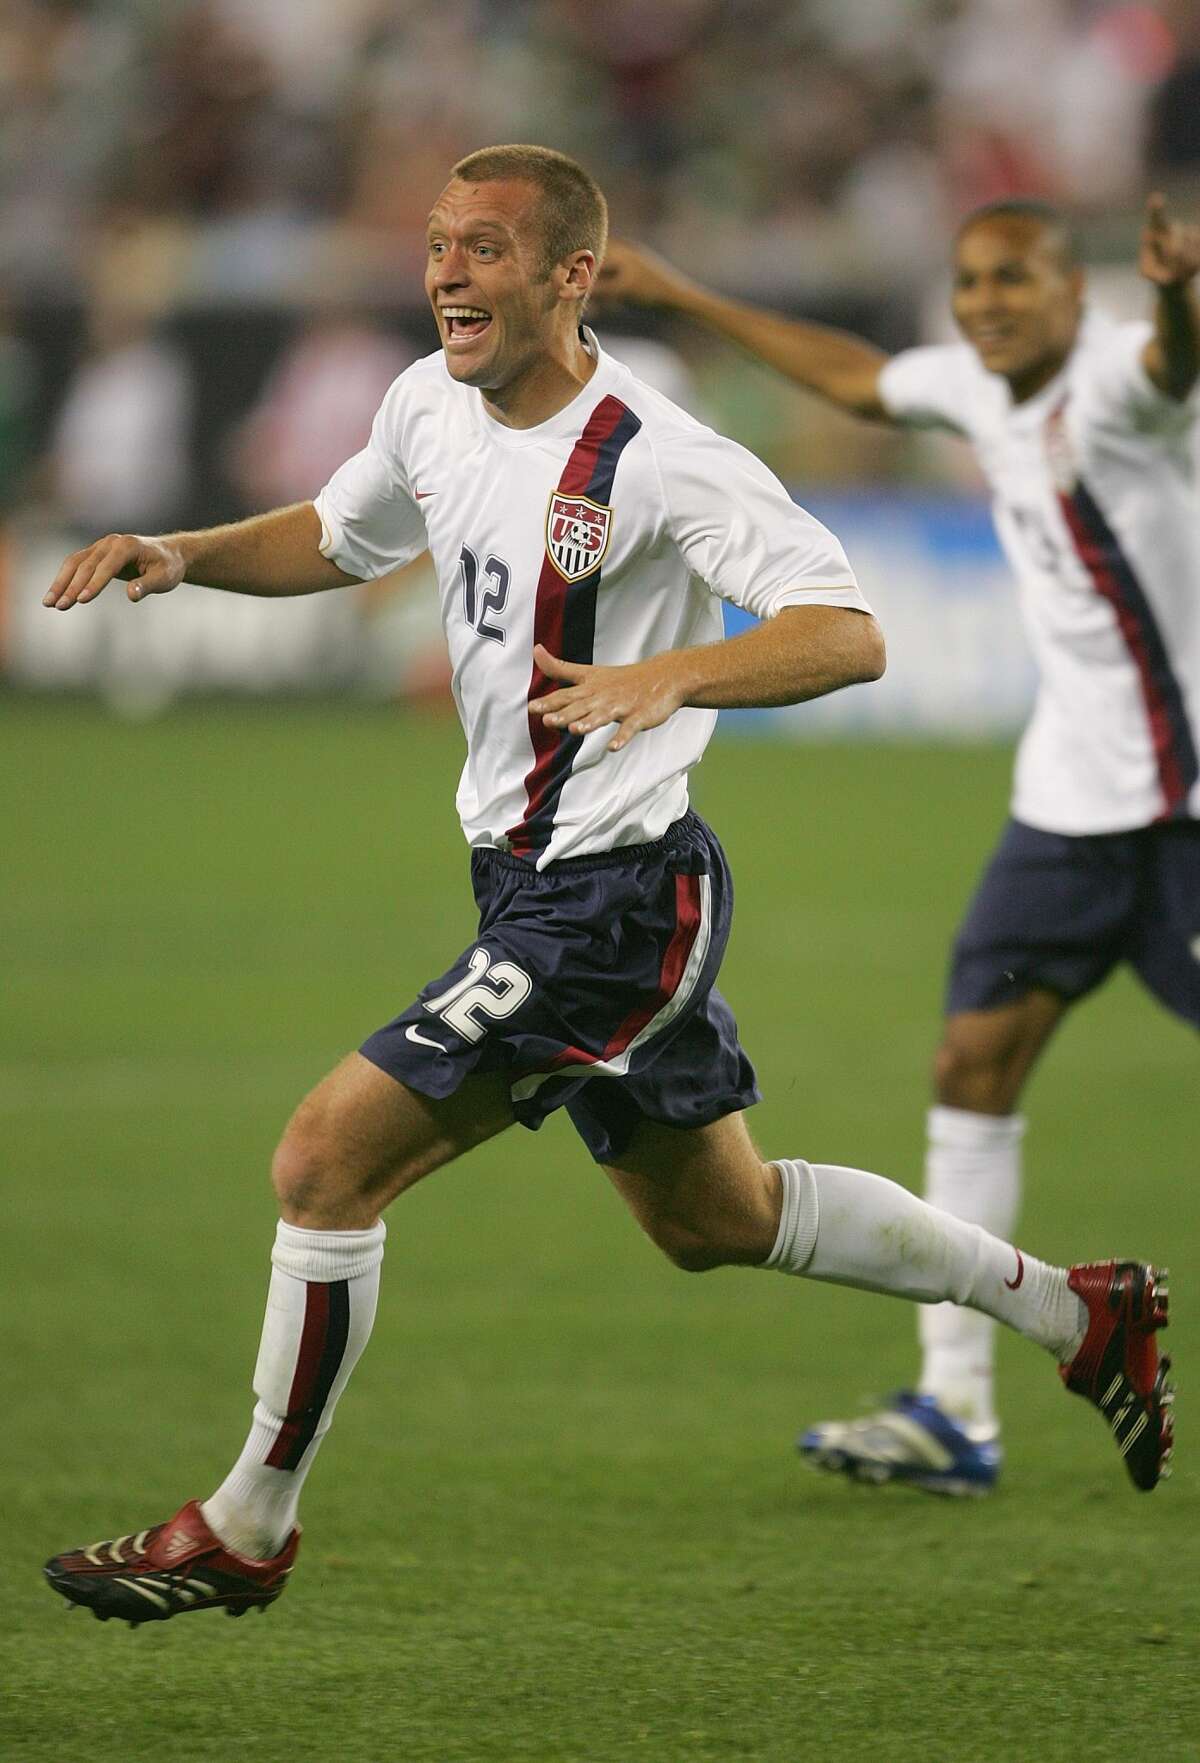 Jimmy Conrad of USA celebrates during their international friendly match against Mexico on February 7, 2007 at the University of Phoenix Stadium in Glendale, Arizona. USA defeated Mexico 2-0.